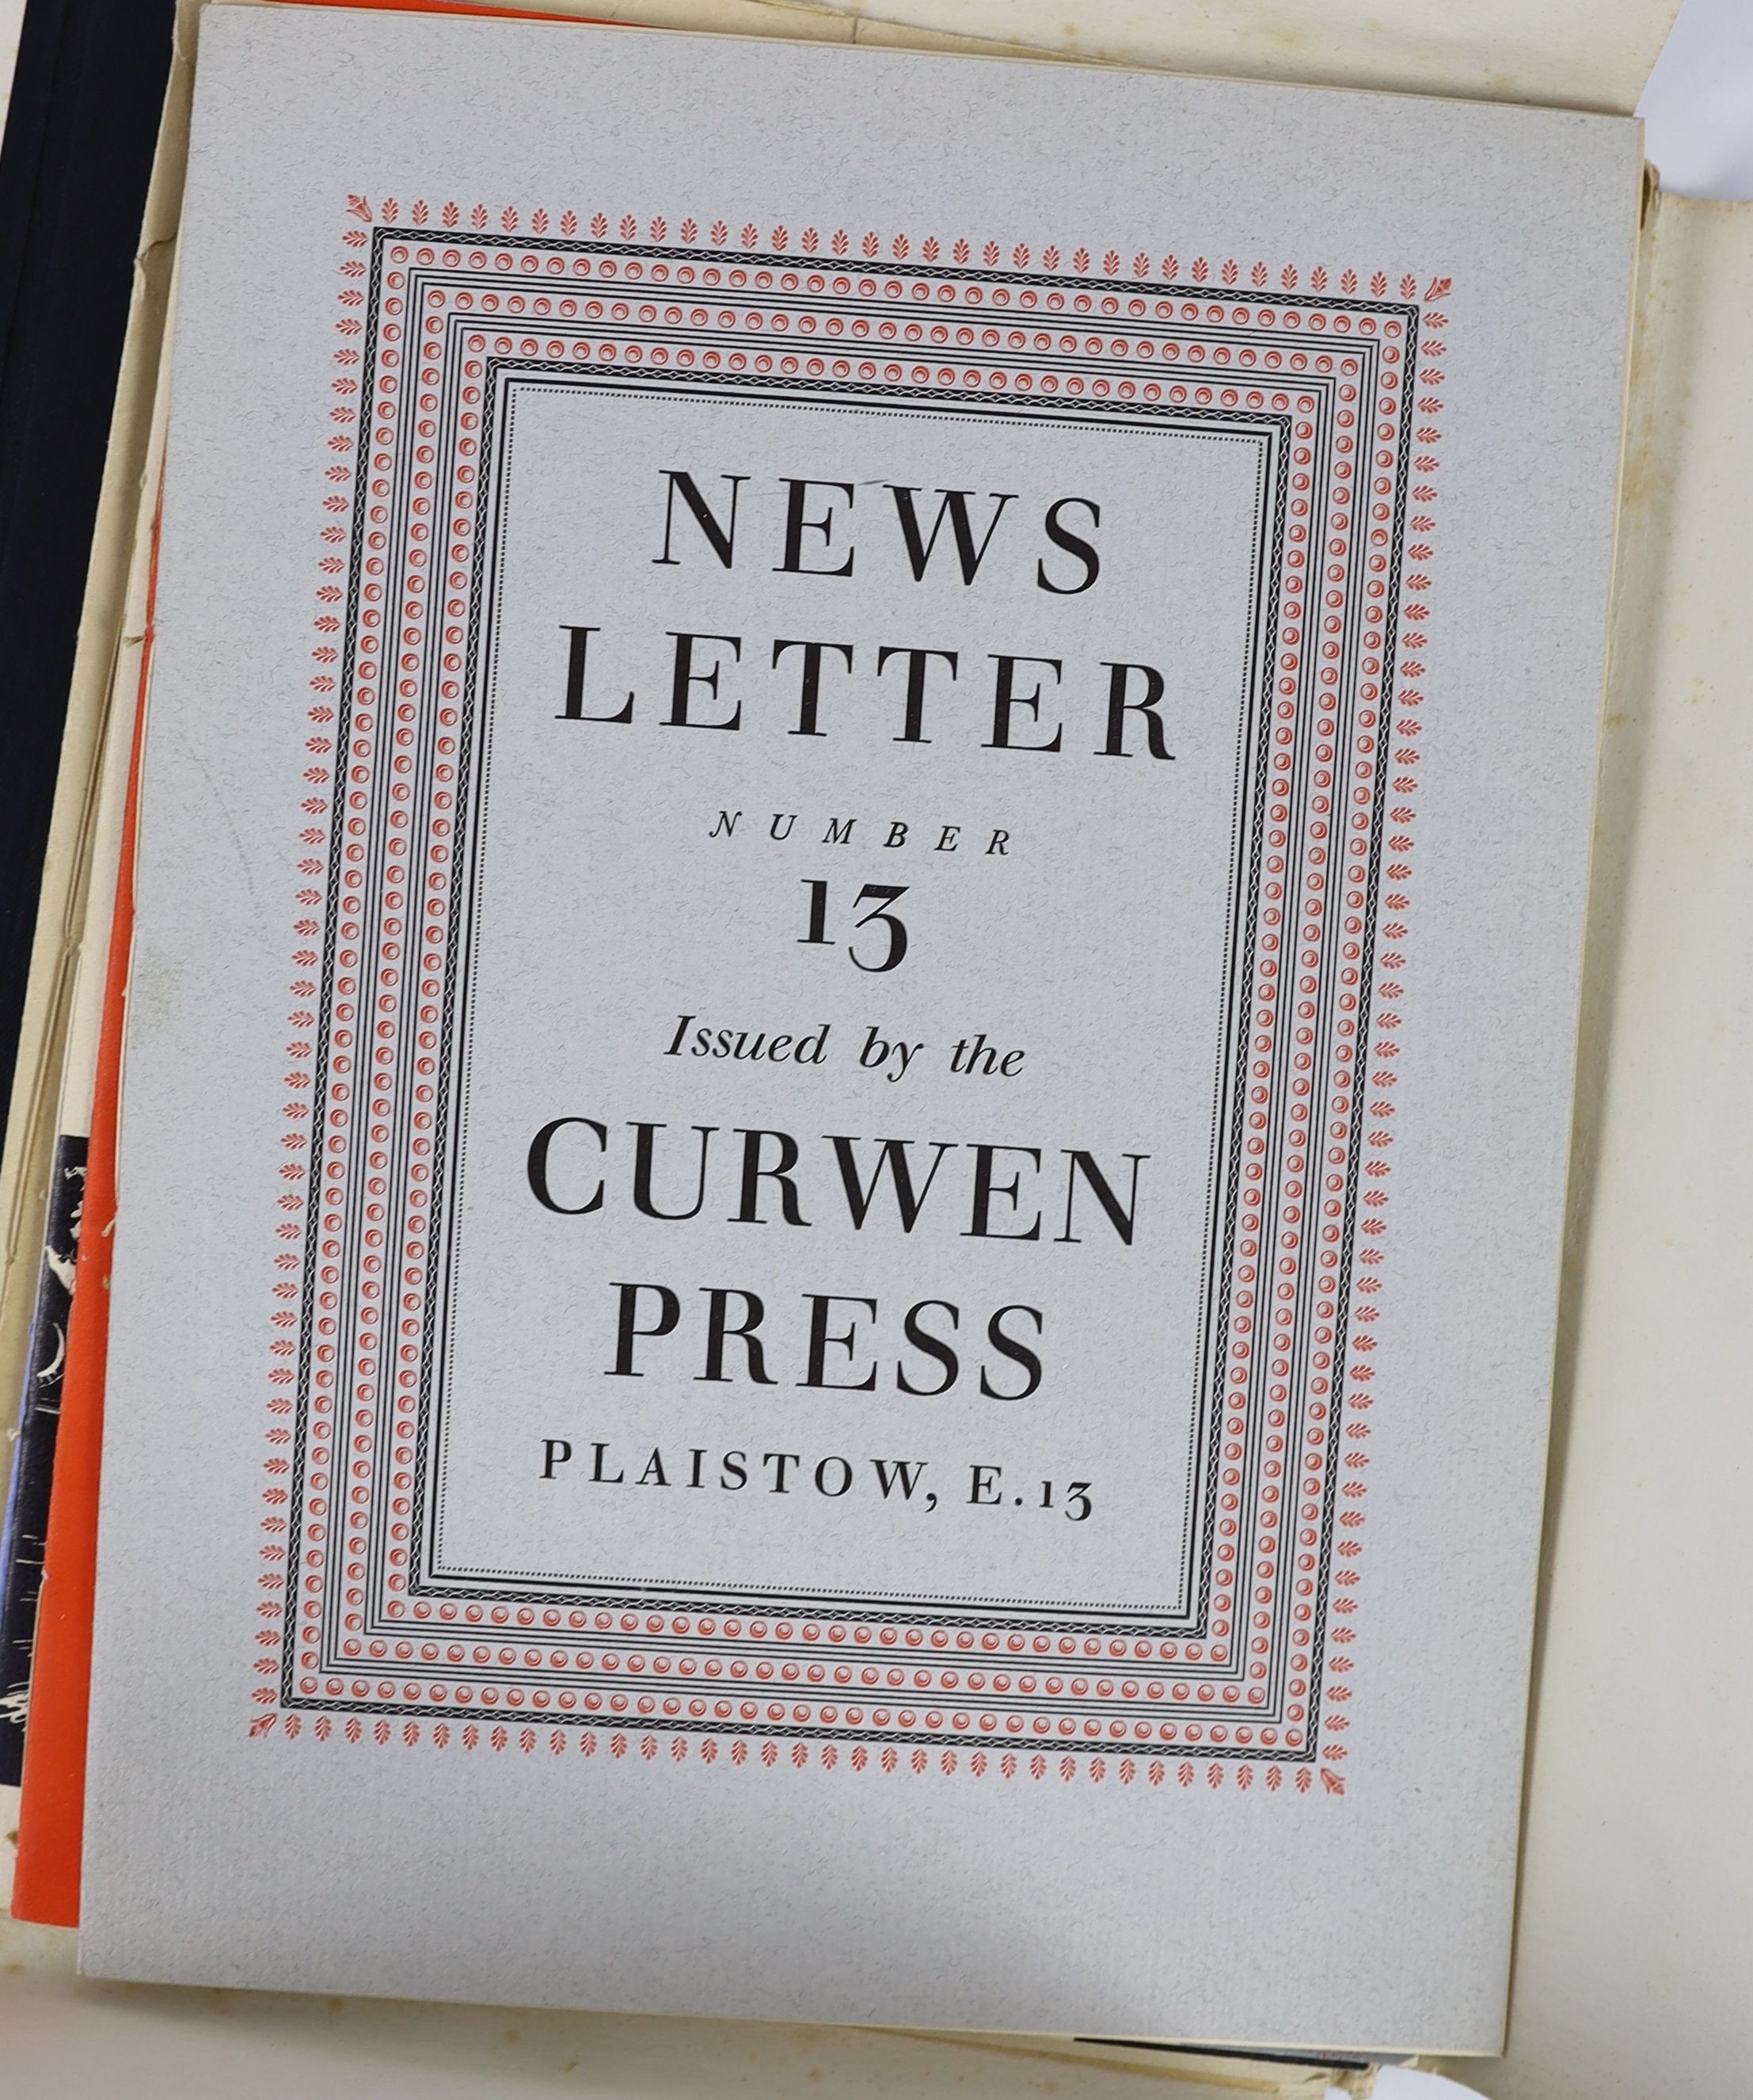 Various [The Curwen Press] - The Curwen Press News-Letter. 1st ed. 15 vols of 16 (lacking no.2). Adorned with numerous illustrations throughout, many coloured and some folding sections. Publishers illustrated paper cover